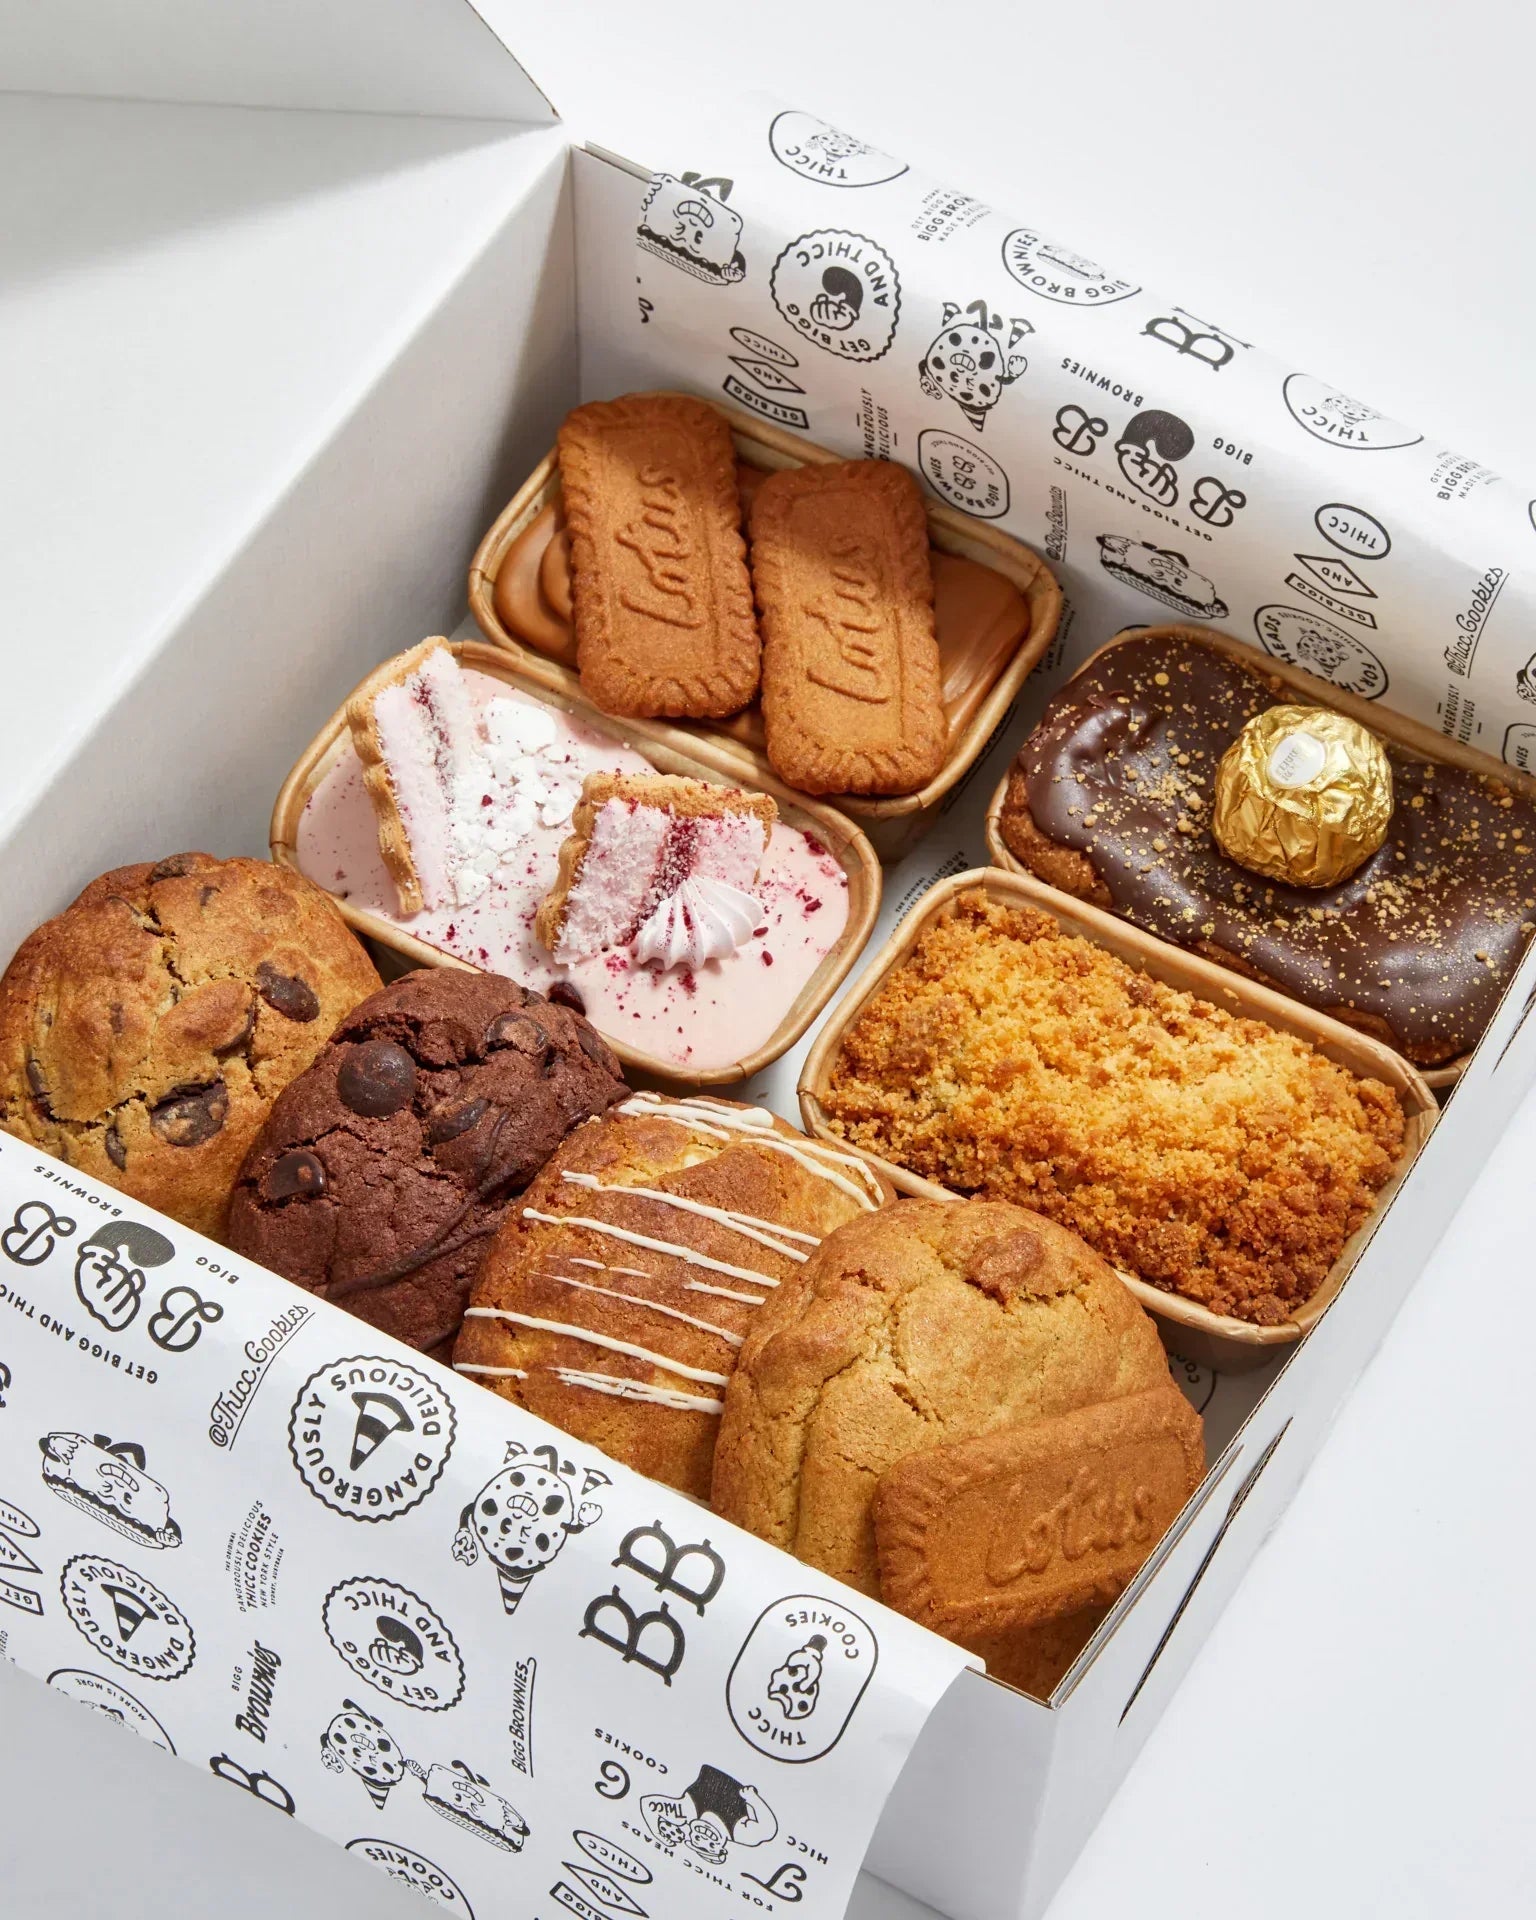 "Thank You" Chat Bubble Box- BIGG Brownies & THICC Cookies - New York Style Cookies